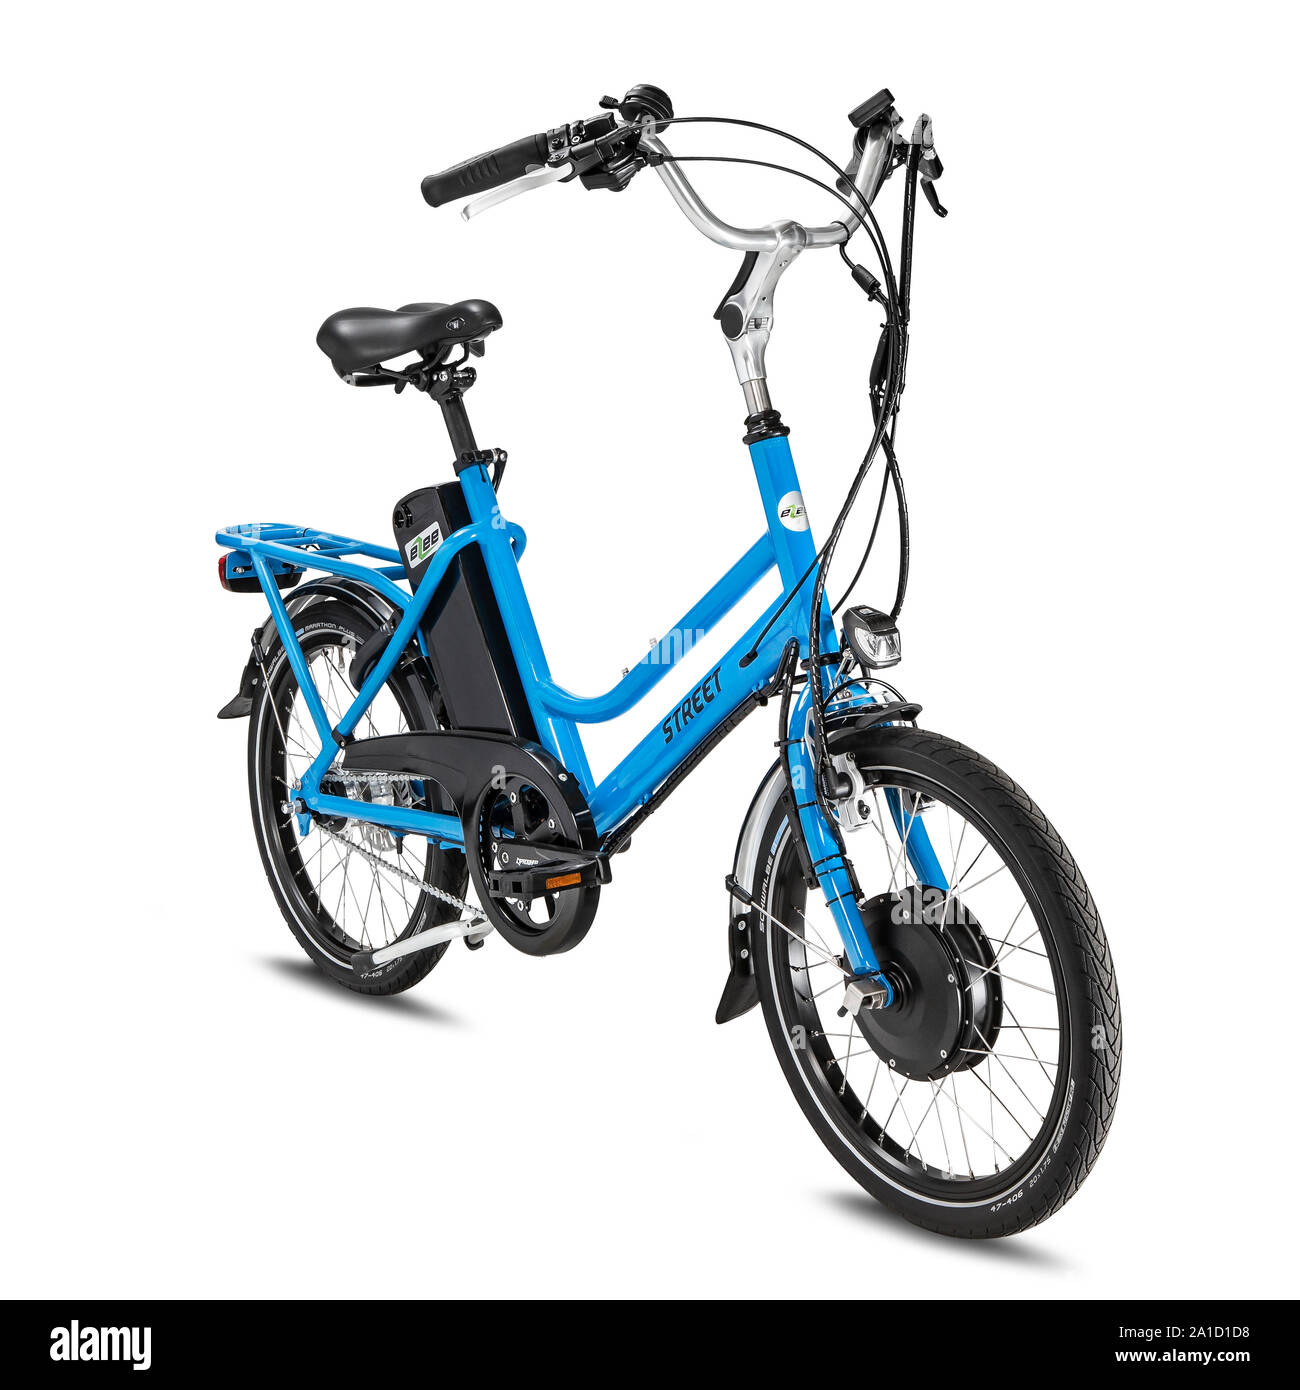 Product style electric bikes isolated against white background. Stock Photo